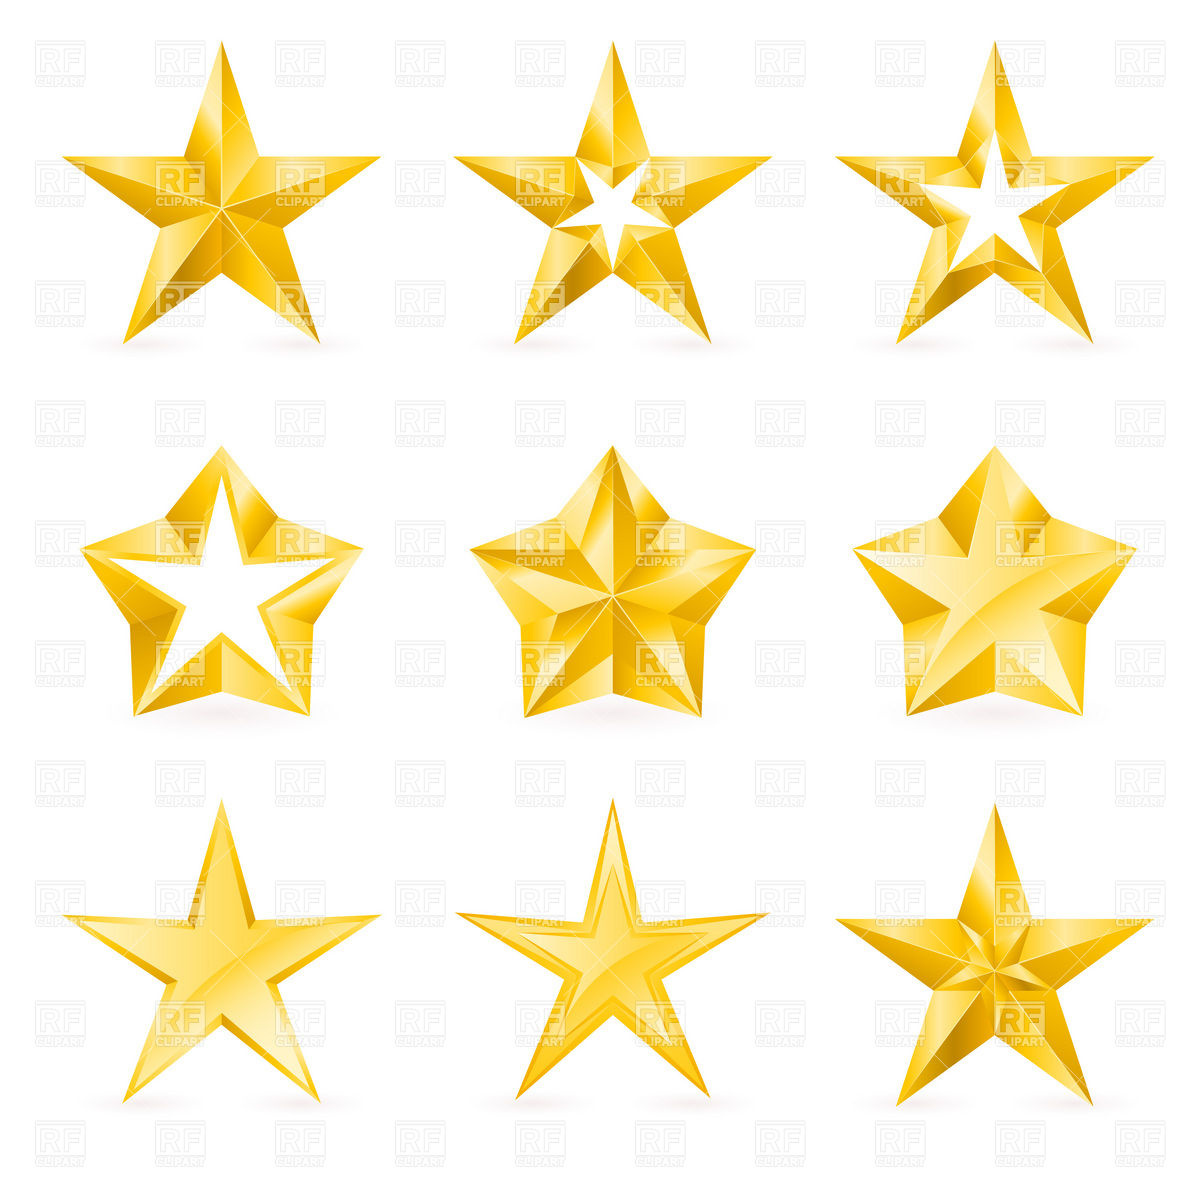 Stylish Five Point Golden Stars With Facets Design Elements